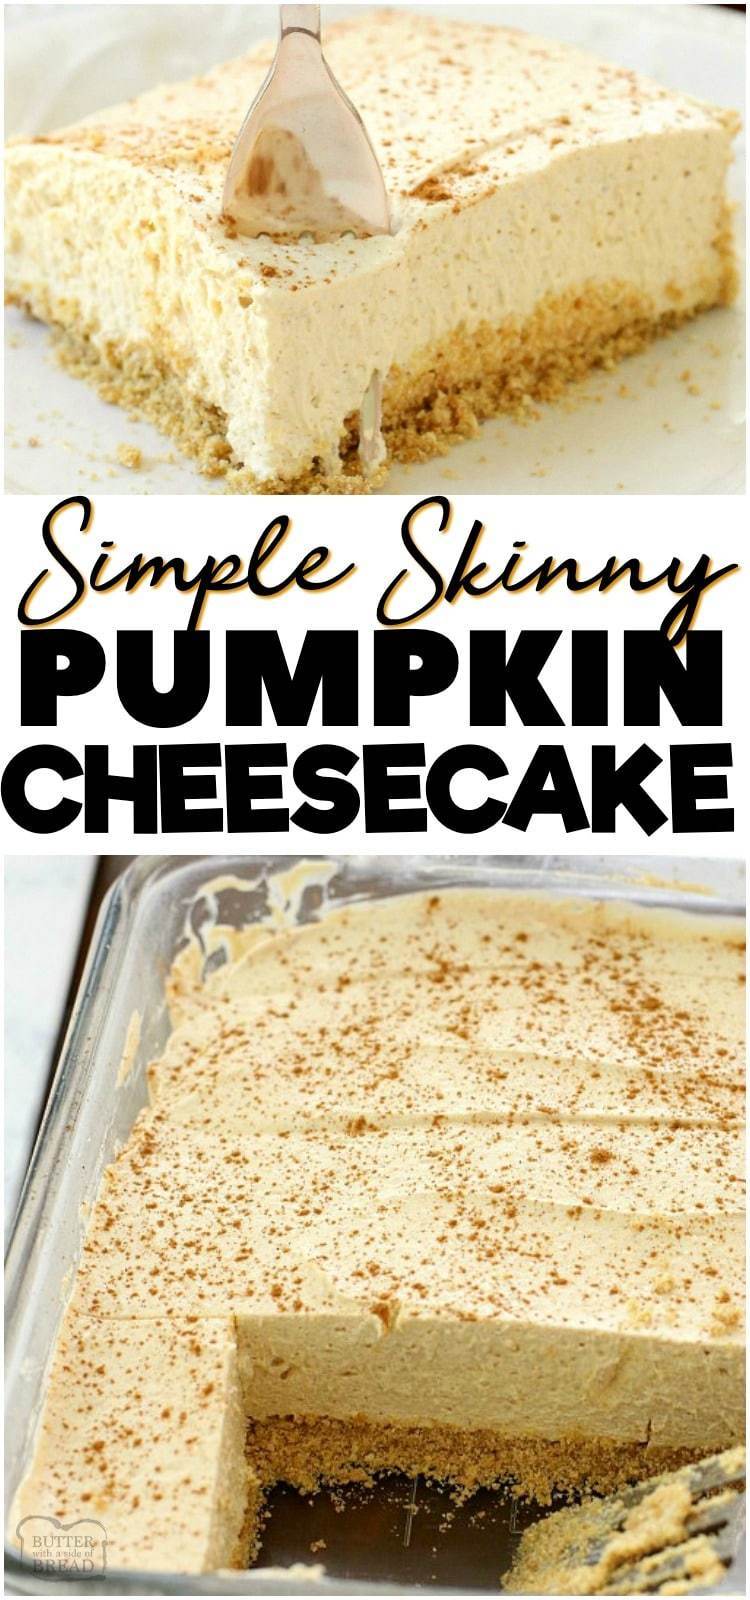 Skinny Pumpkin Cheesecake is a no-bake pumpkin cheesecake that is lighter than the traditional version but still has all the classic flavors that you love! #pumpkin #cheesecake #skinny #light #dessert #Thanksgiving #Christmas #dessert #recipe from BUTTER WITH A SIDE OF BREAD